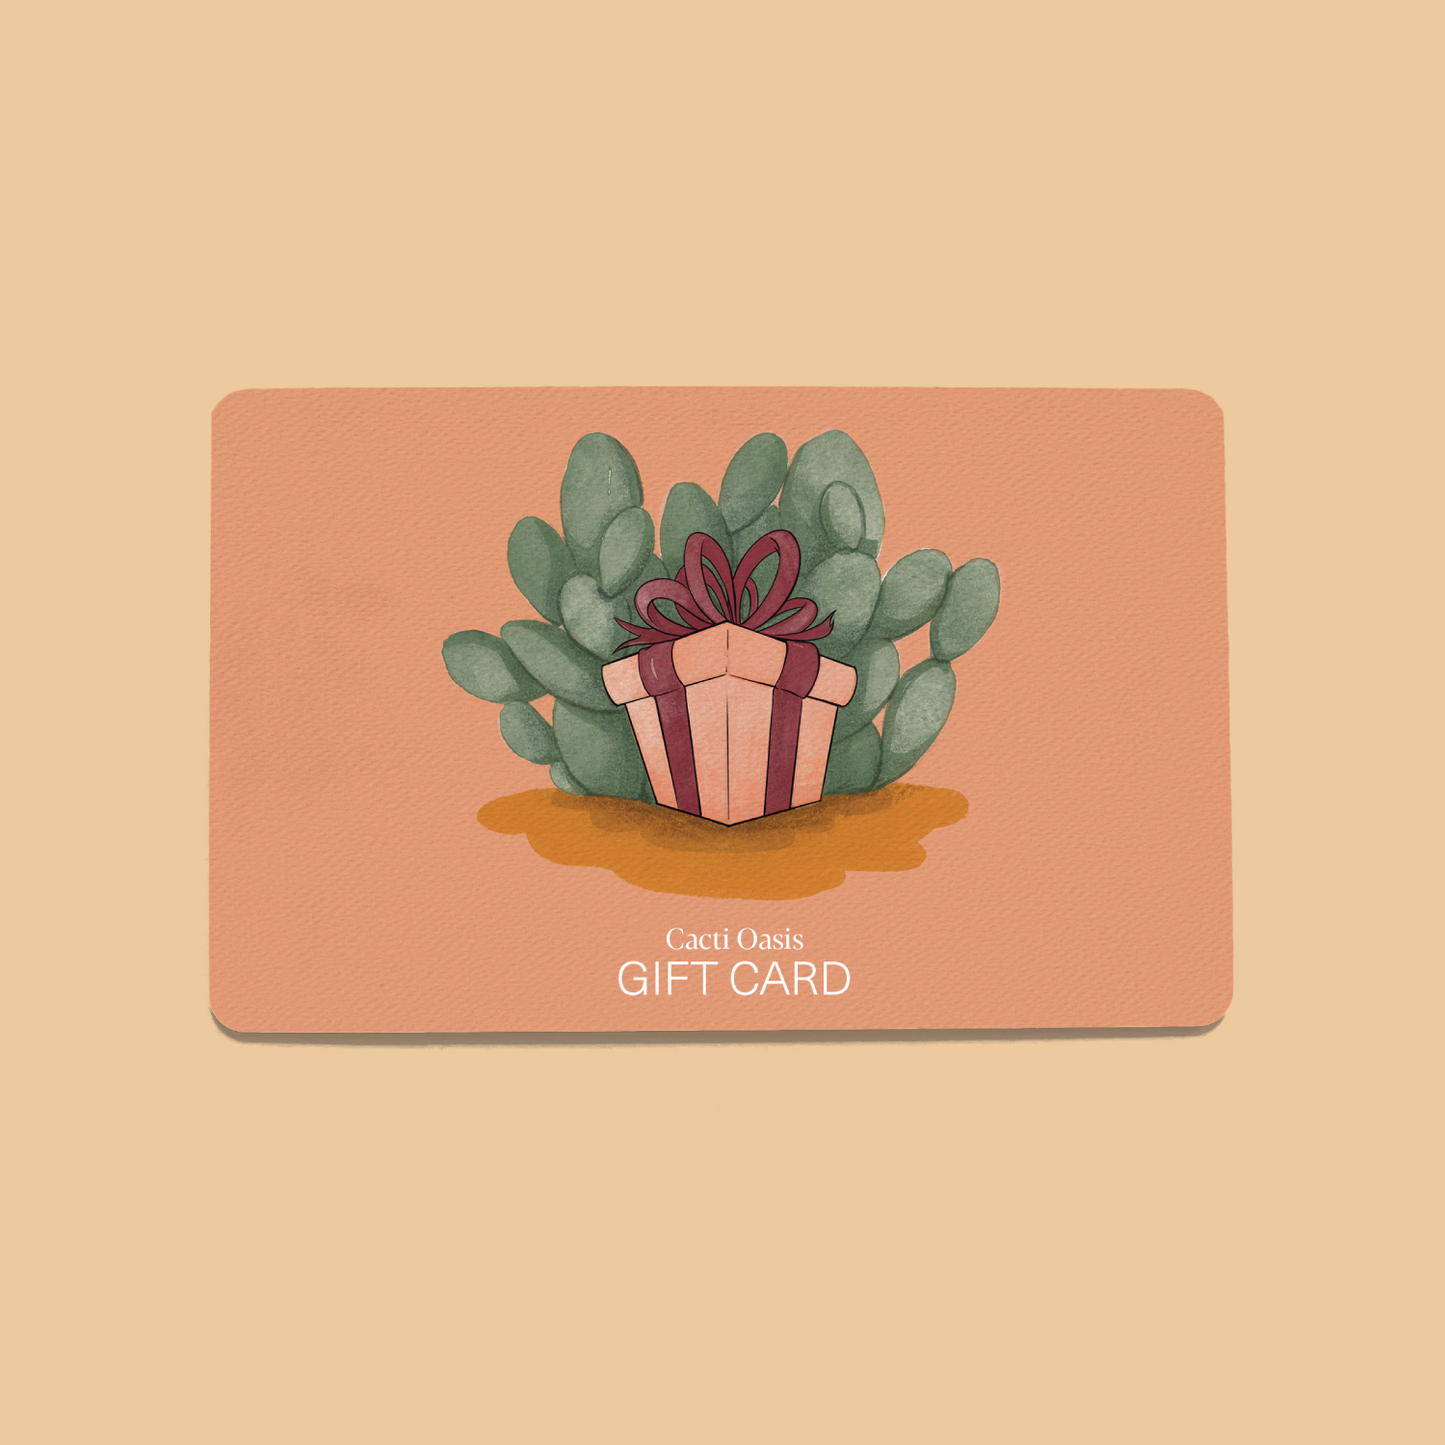 Cacti Oasis Gift Card